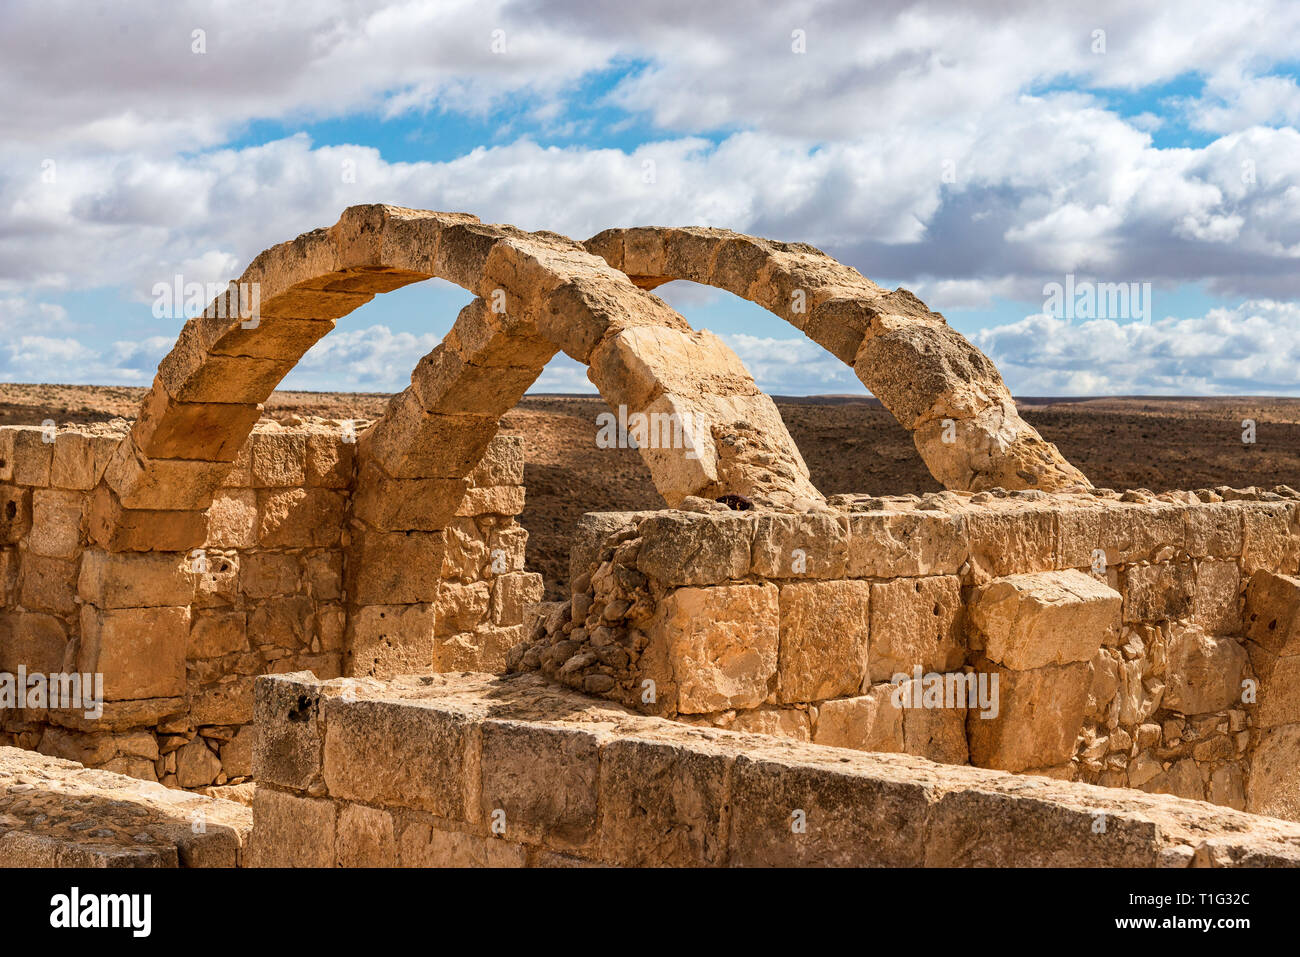 AVDAT, ISRAEL / FEB 19, 2018:  The ruins of  this Christian Nabatean city in Israel's Negev desert, abandoned after the 7th century Muslim conquest. Stock Photo